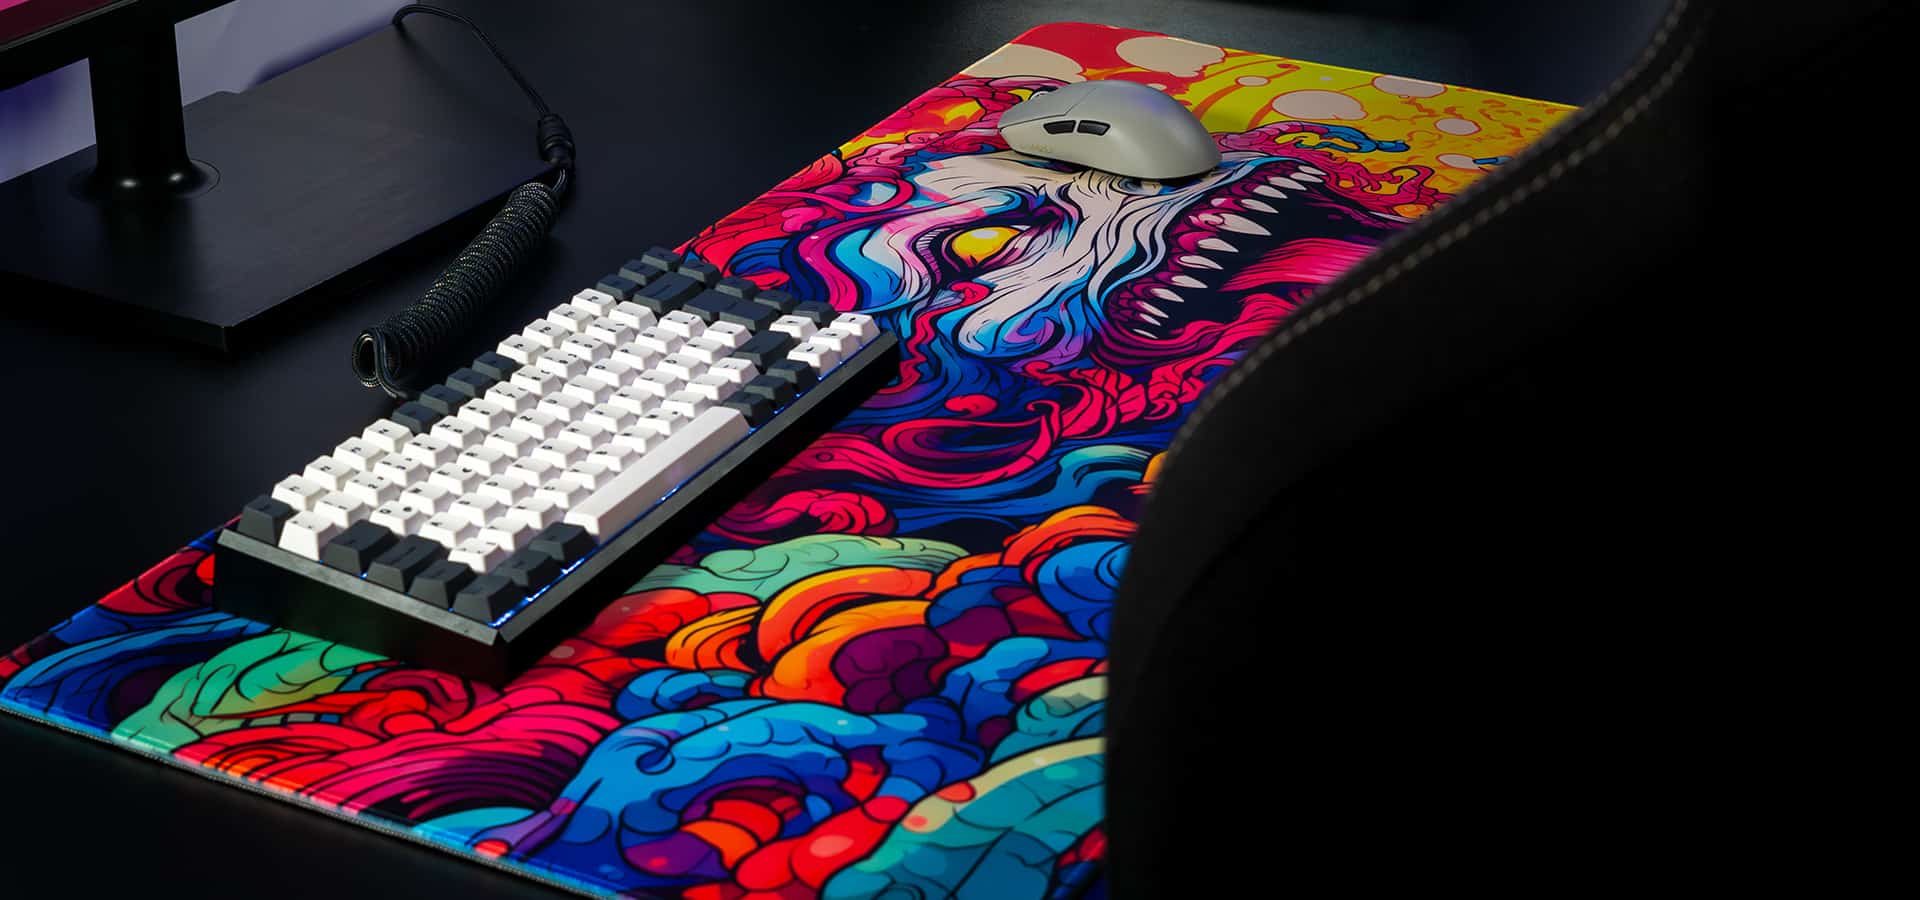  Configure your custom gaming mouse pad in various sizes